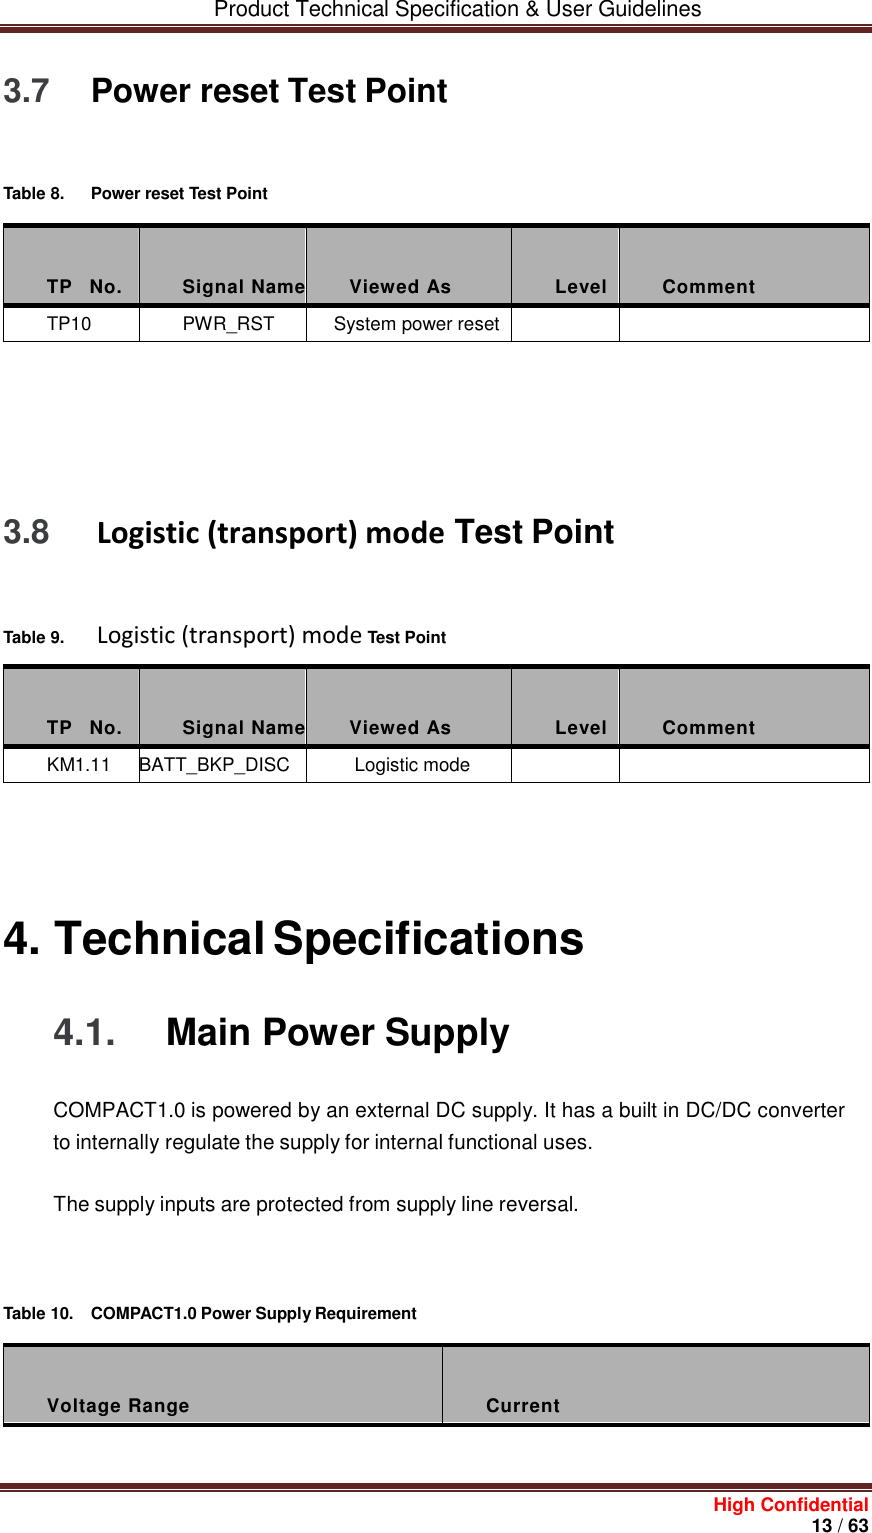         Product Technical Specification &amp; User Guidelines     High Confidential       13 / 63  3.7 Power reset Test Point    Table 8.  Power reset Test Point    TP    No.  Signal Name  Viewed As  Level  Comment TP10 PWR_RST System power reset            3.8  Logistic (transport) mode Test Point    Table 9.   Logistic (transport) mode Test Point    TP    No.  Signal Name  Viewed As  Level  Comment KM1.11 BATT_BKP_DISC  Logistic mode          4. Technical Specifications 4.1.  Main Power Supply COMPACT1.0 is powered by an external DC supply. It has a built in DC/DC converter to internally regulate the supply for internal functional uses. The supply inputs are protected from supply line reversal.       Table 10.  COMPACT1.0 Power Supply Requirement    Voltage Range  Current 